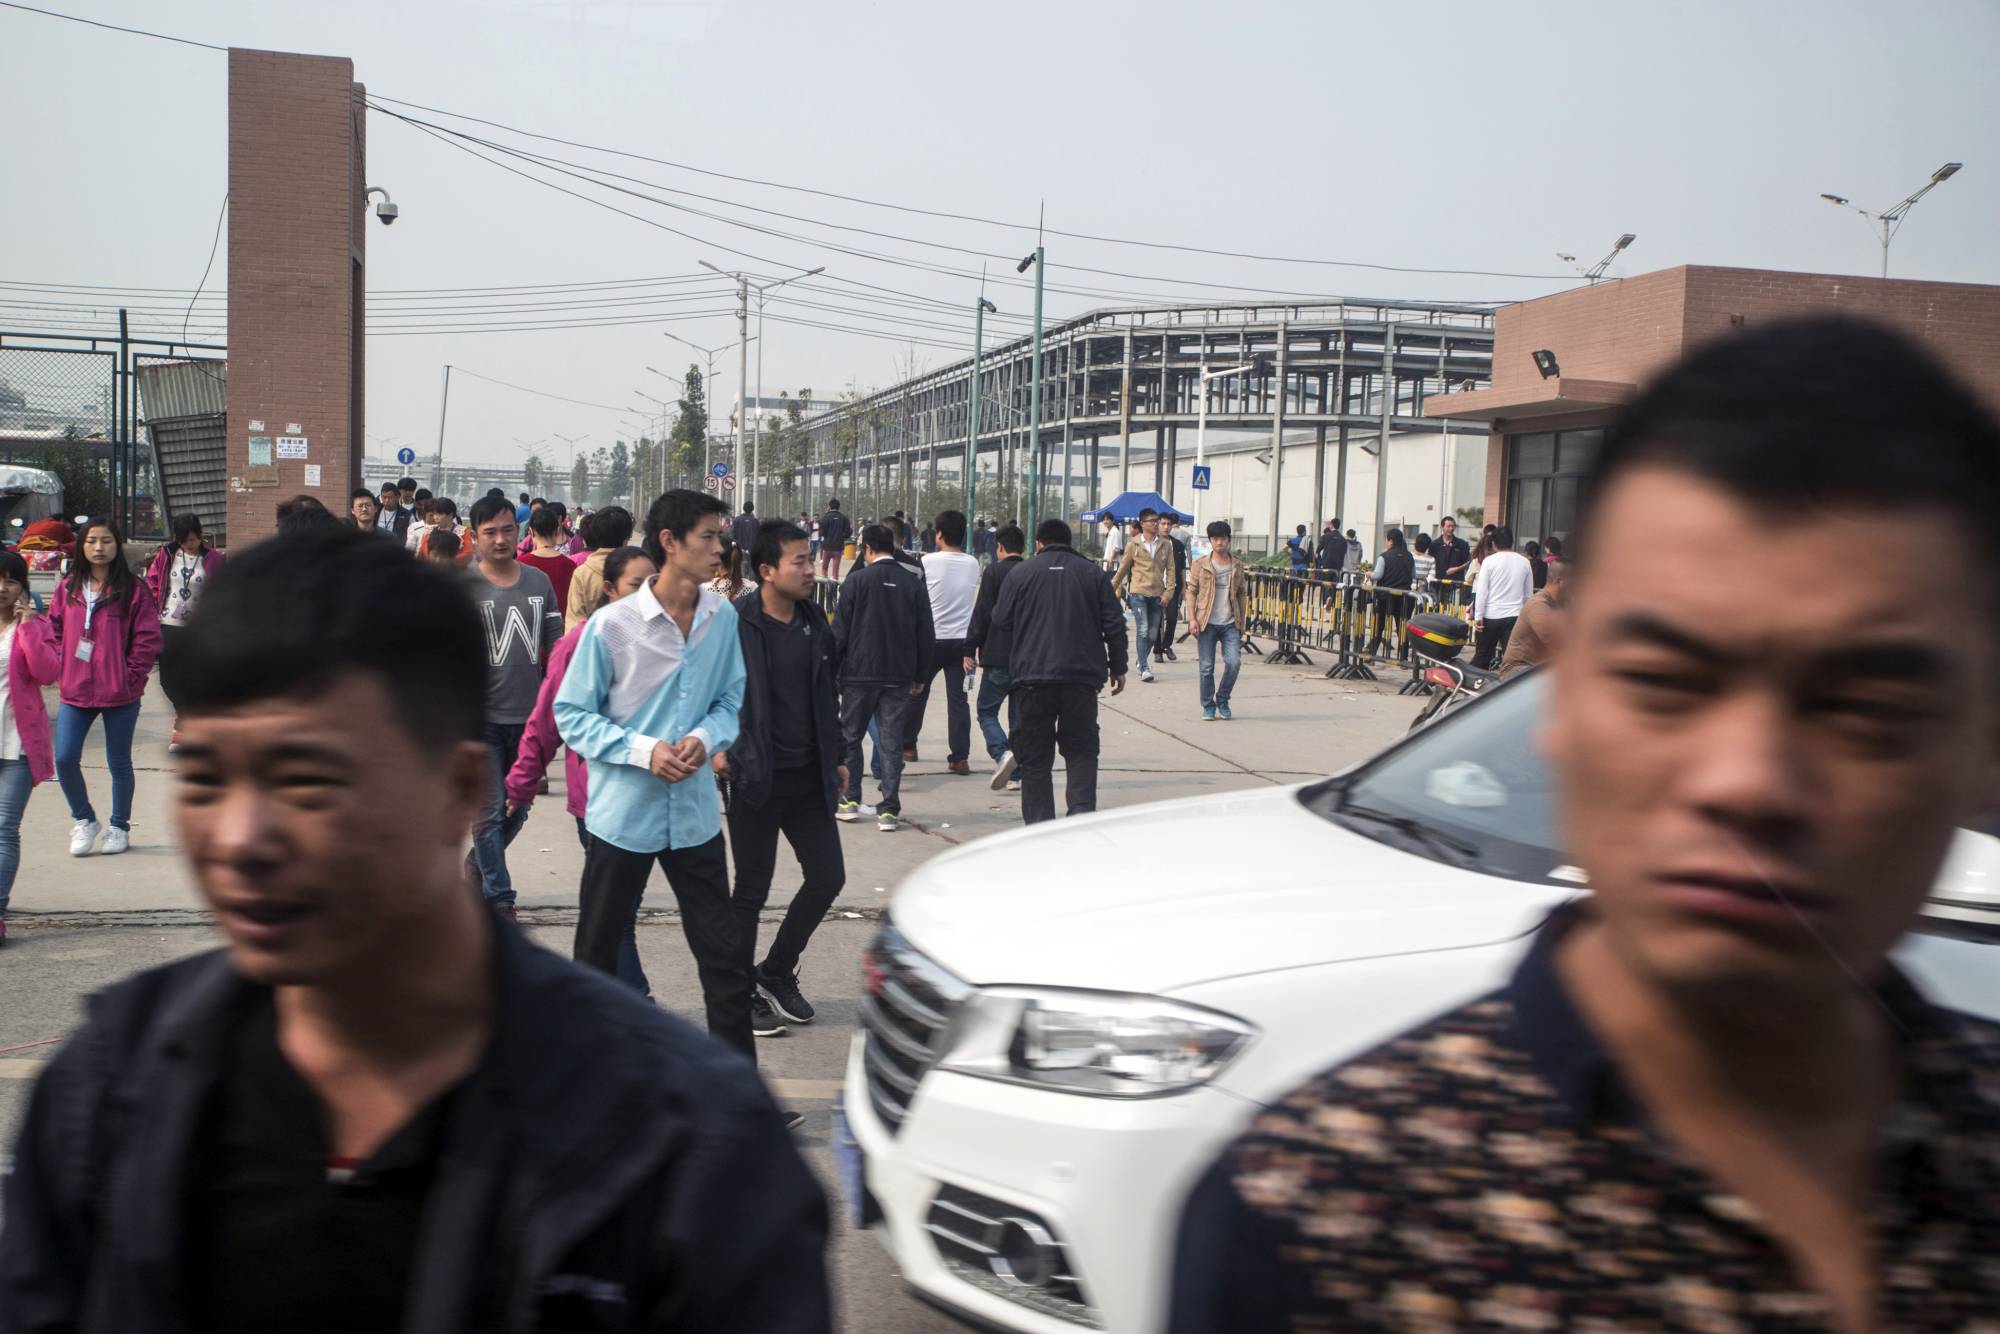 Covid-19 Surge: Mass Exodus from iPhone Factory in China